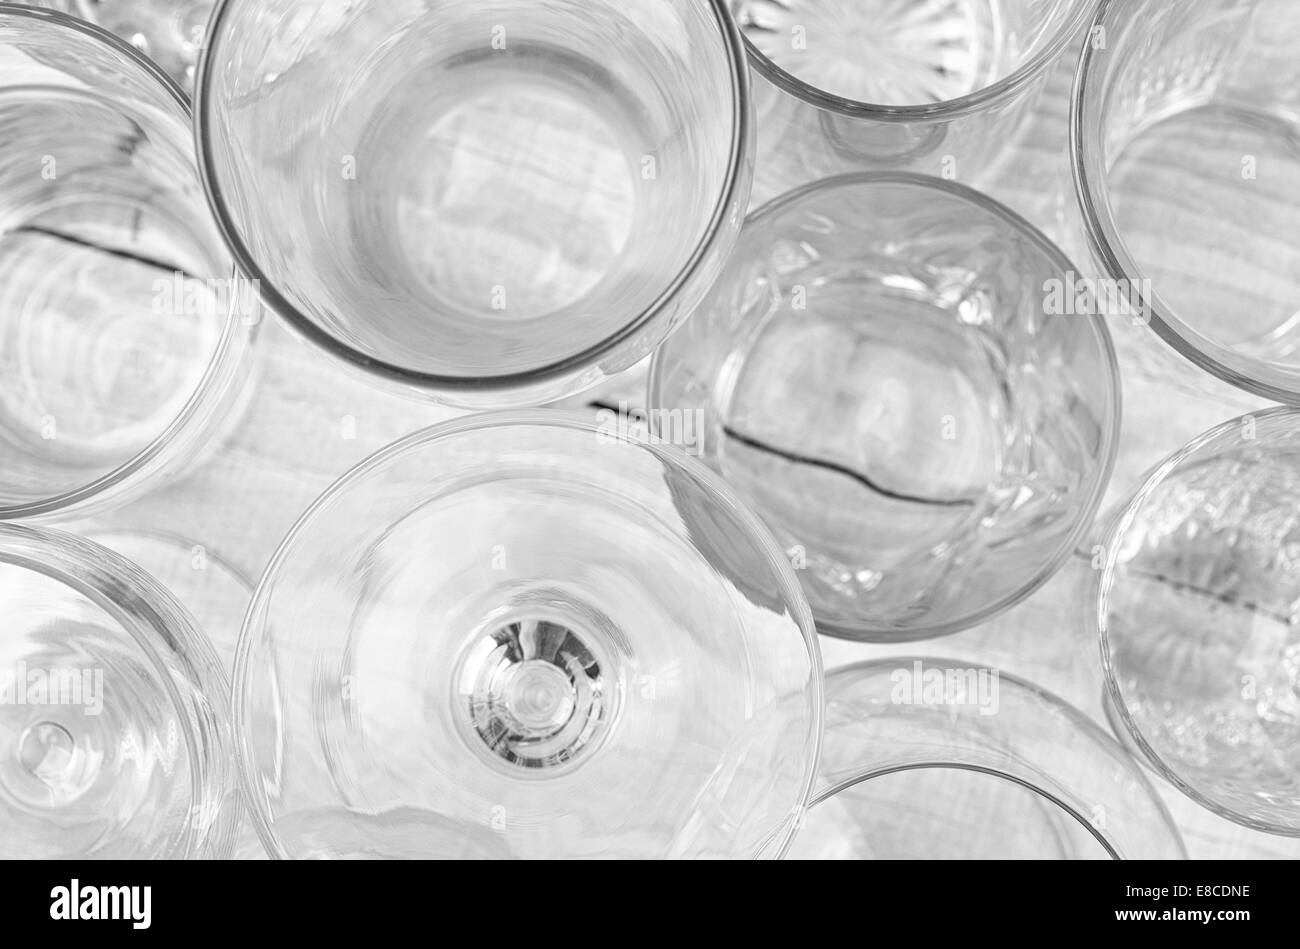 High angle shot of assorted glassware forming an abstract pattern. Horizontal format on a white wood table, with shallow depth o Stock Photo